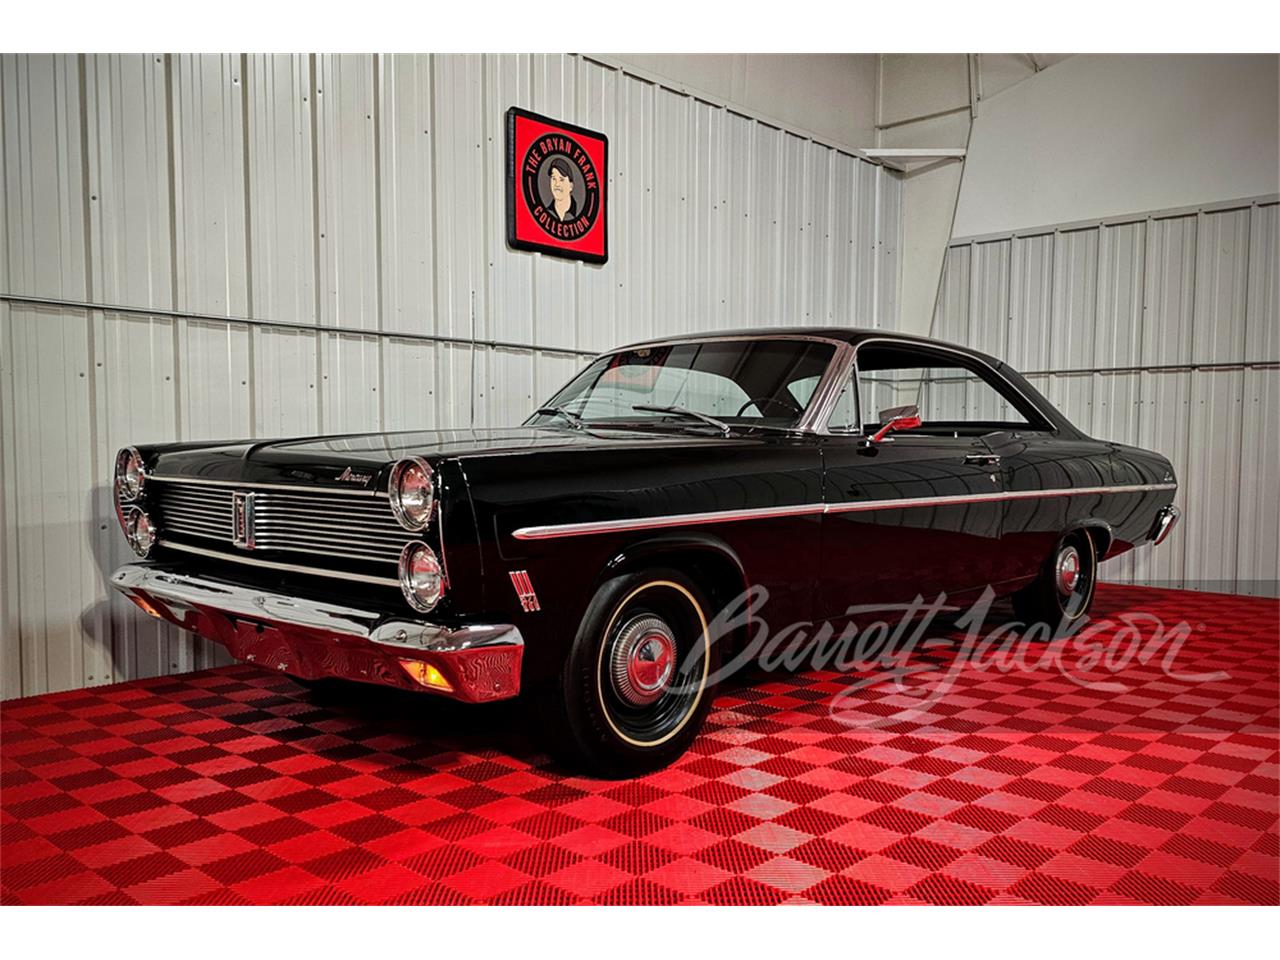 For Sale at Auction: 1967 Mercury Comet in Scottsdale, Arizona for sale in Scottsdale, AZ